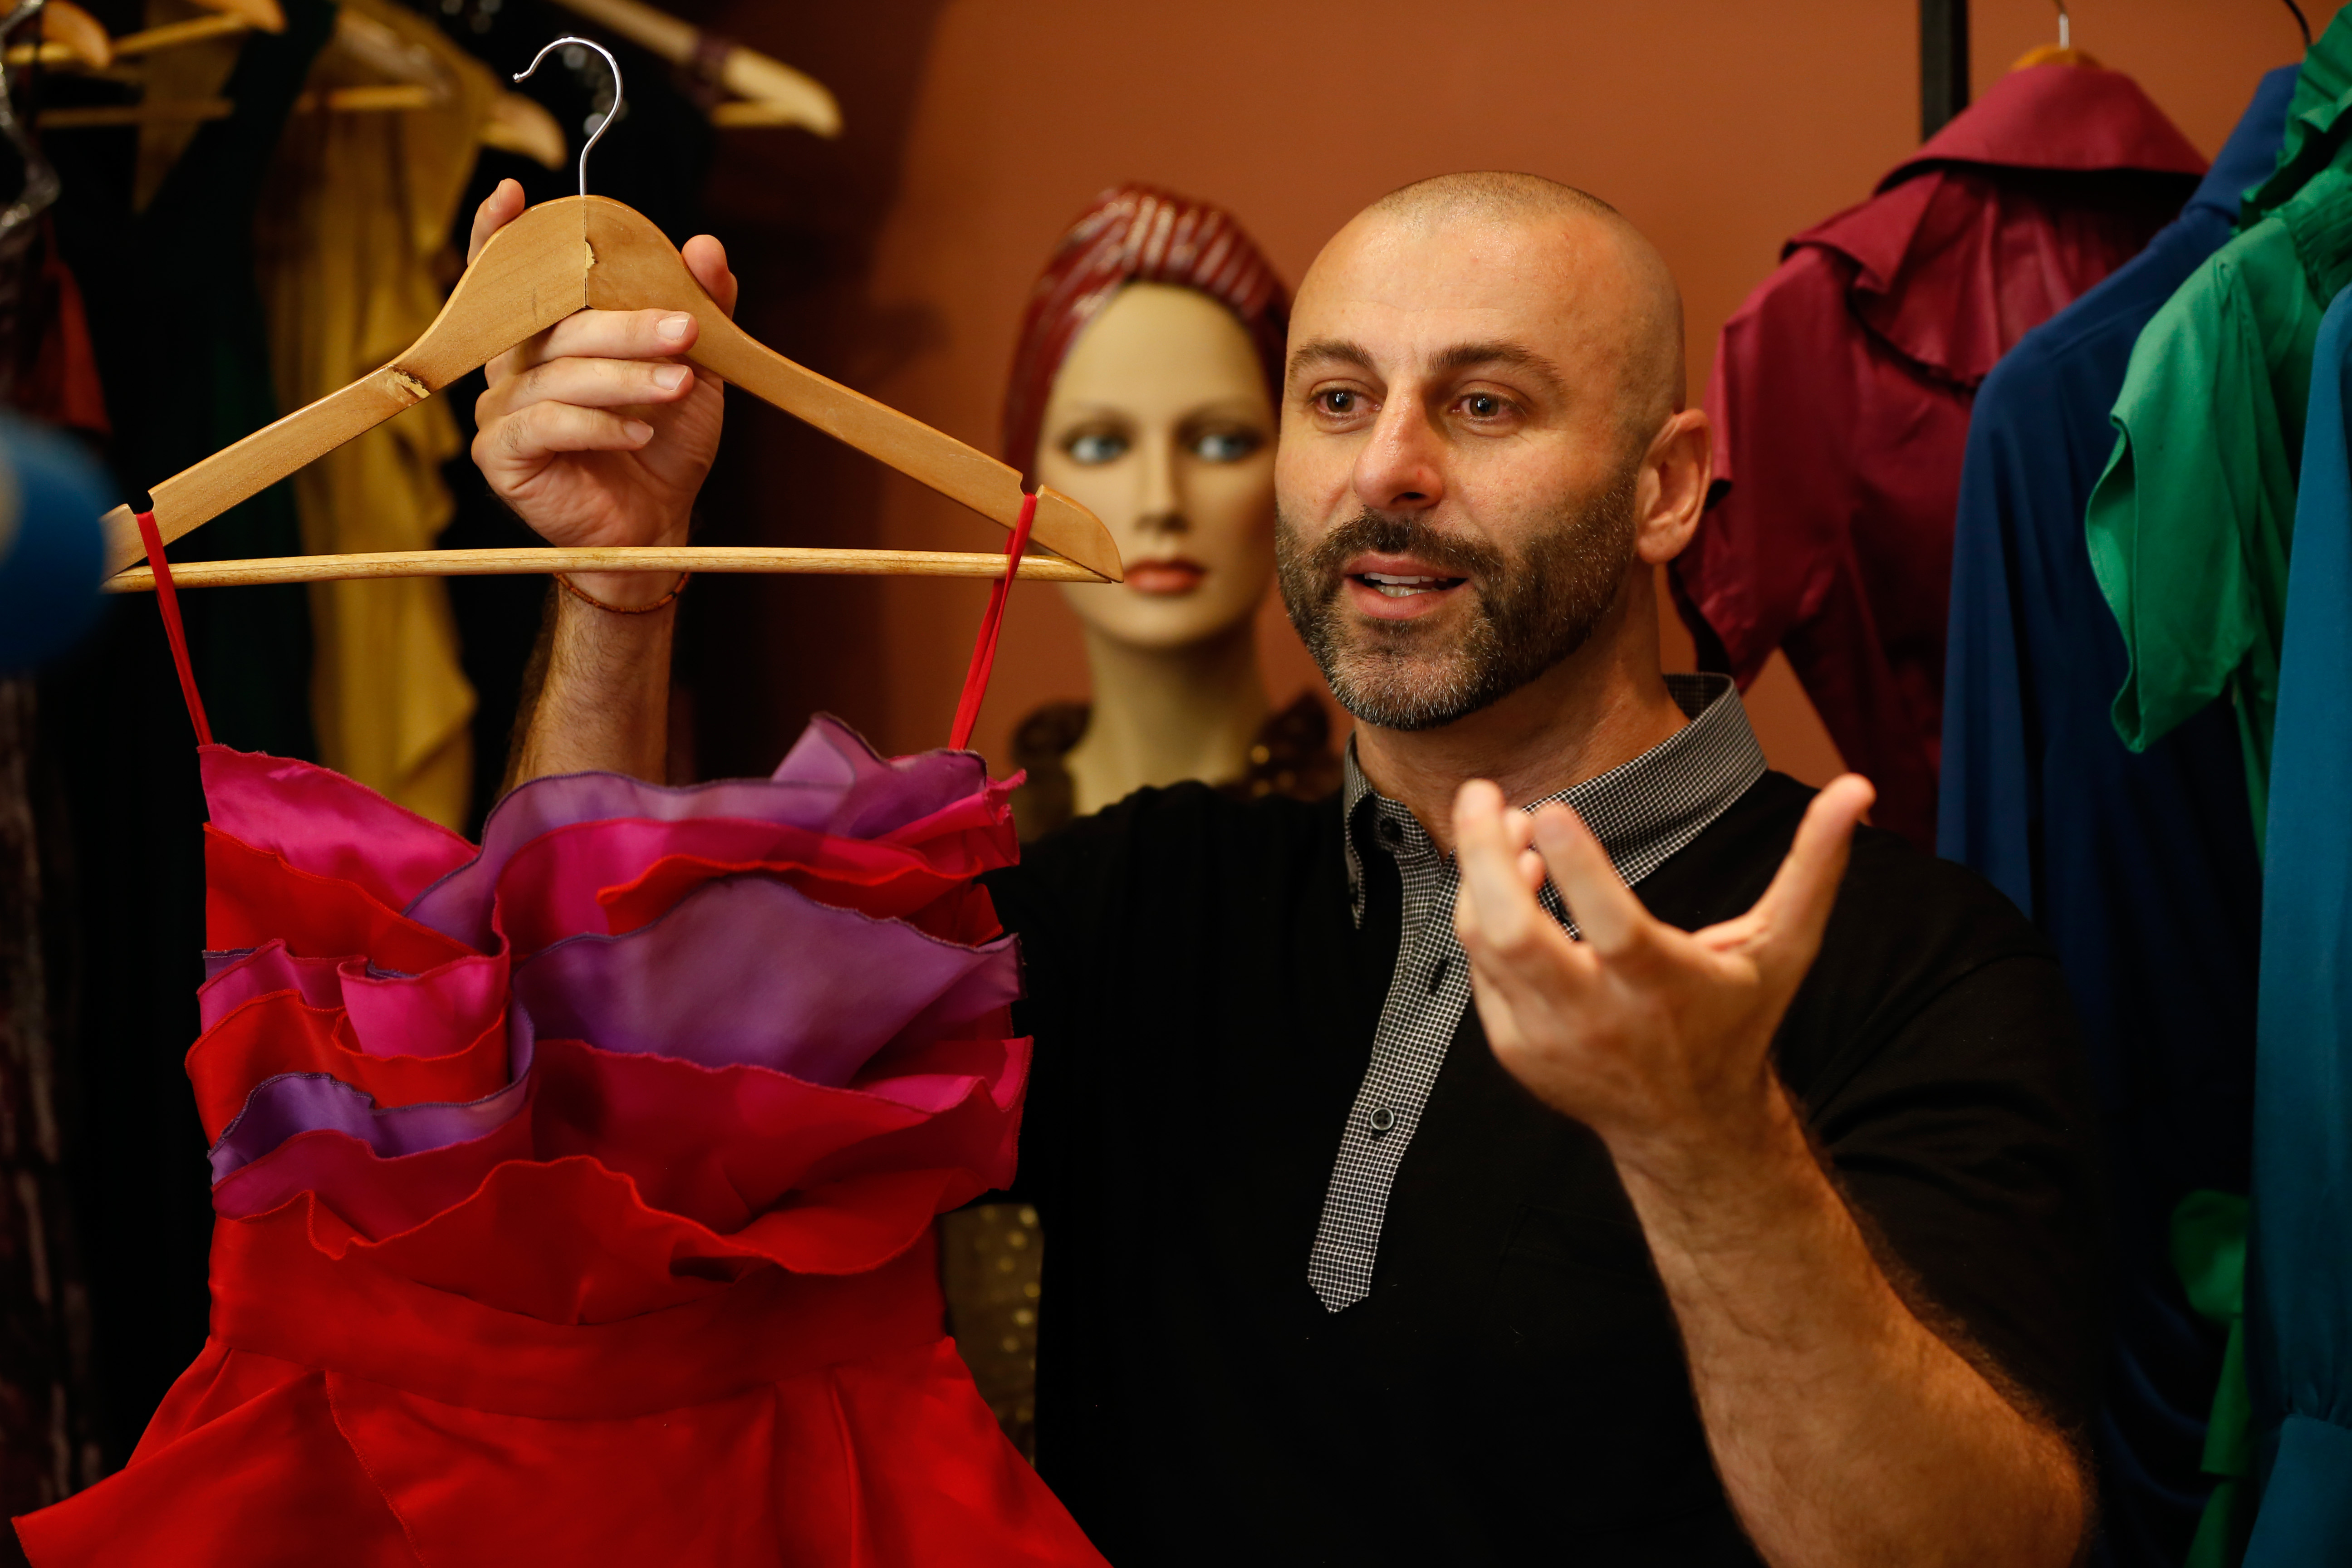 Palestinian American fashion designer Rami Kashou shows one of his designs, during a fitting session, at a pop-up  shop in the West Bank city of Ramallah on July 27, 2016.  The world-renouned designer who has been away from his native city for several years, showed his designs to Palestinian women in the Ramallah shop for 3 days. Kashou's clients include Jordan's queen Rania, the top model Heidi Klum and public figure Kim Kardashian.  / AFP PHOTO / ABBAS MOMANI